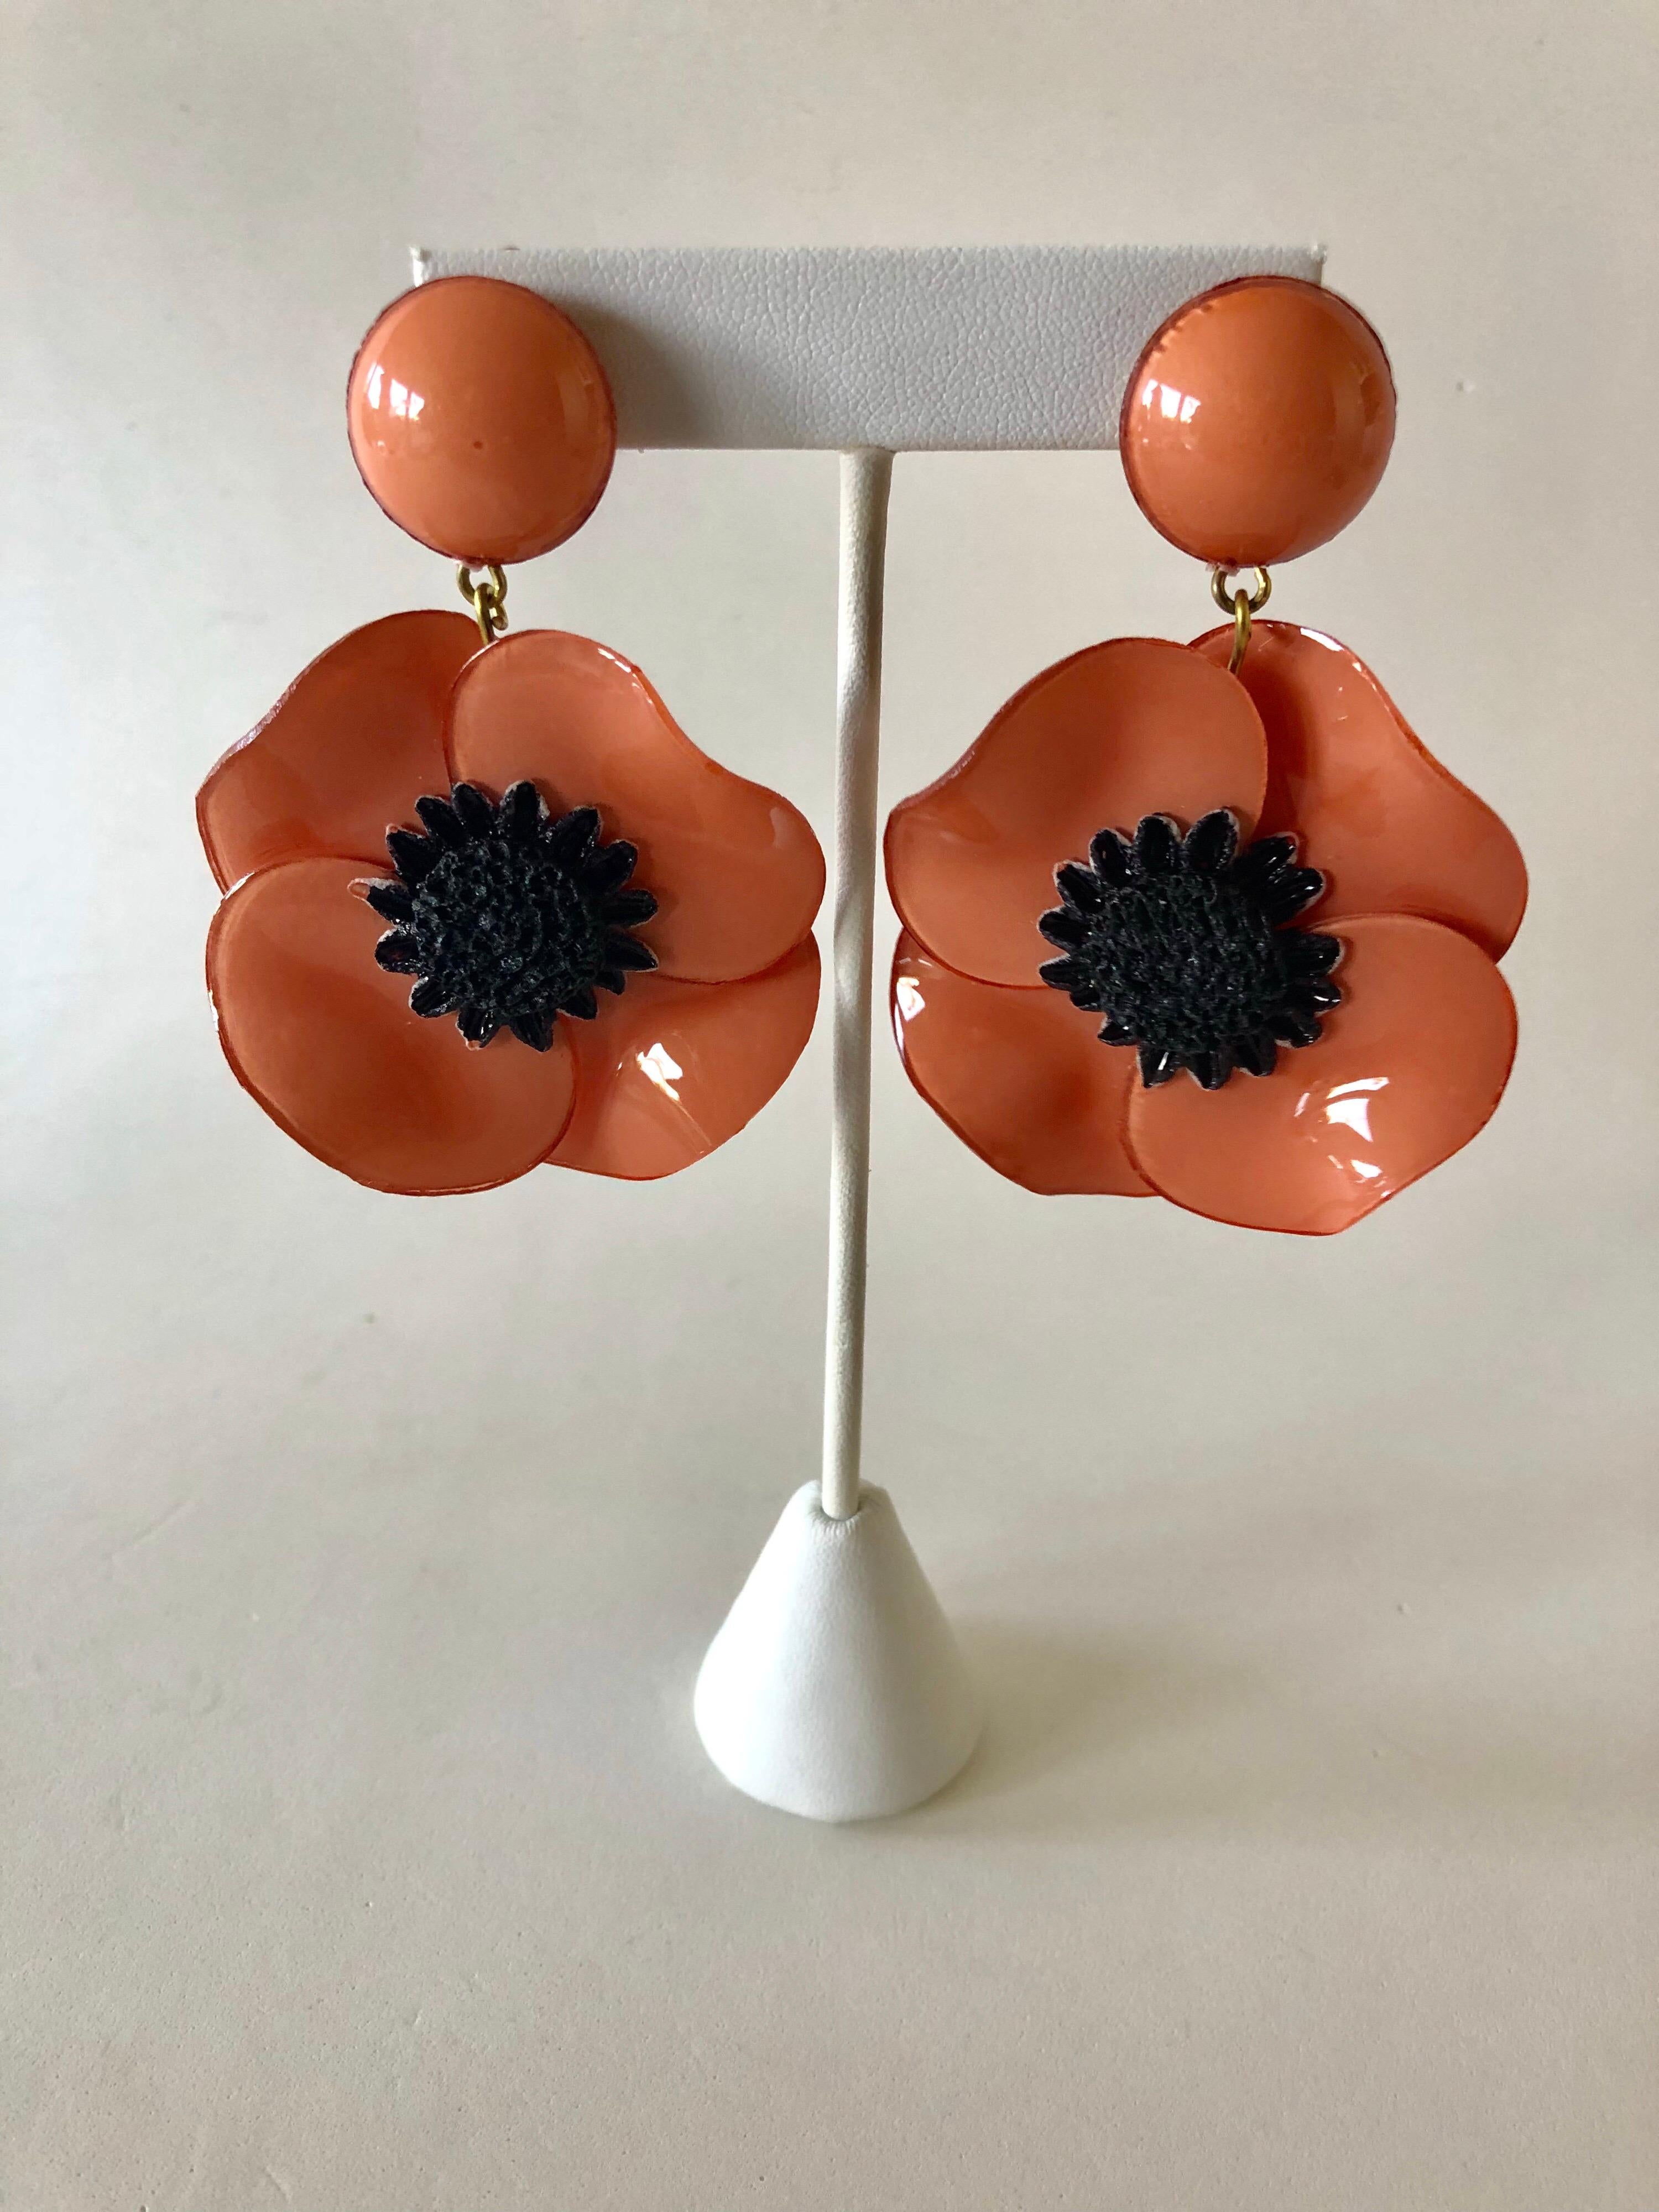 Light and easy to wear, these handmade artisanal contemporary clip-on earrings were made in Paris by Cilea. The lightweight clip-on earrings feature a single architectural enameline (enamel and resin composite) pink poppy flower. The poppies are